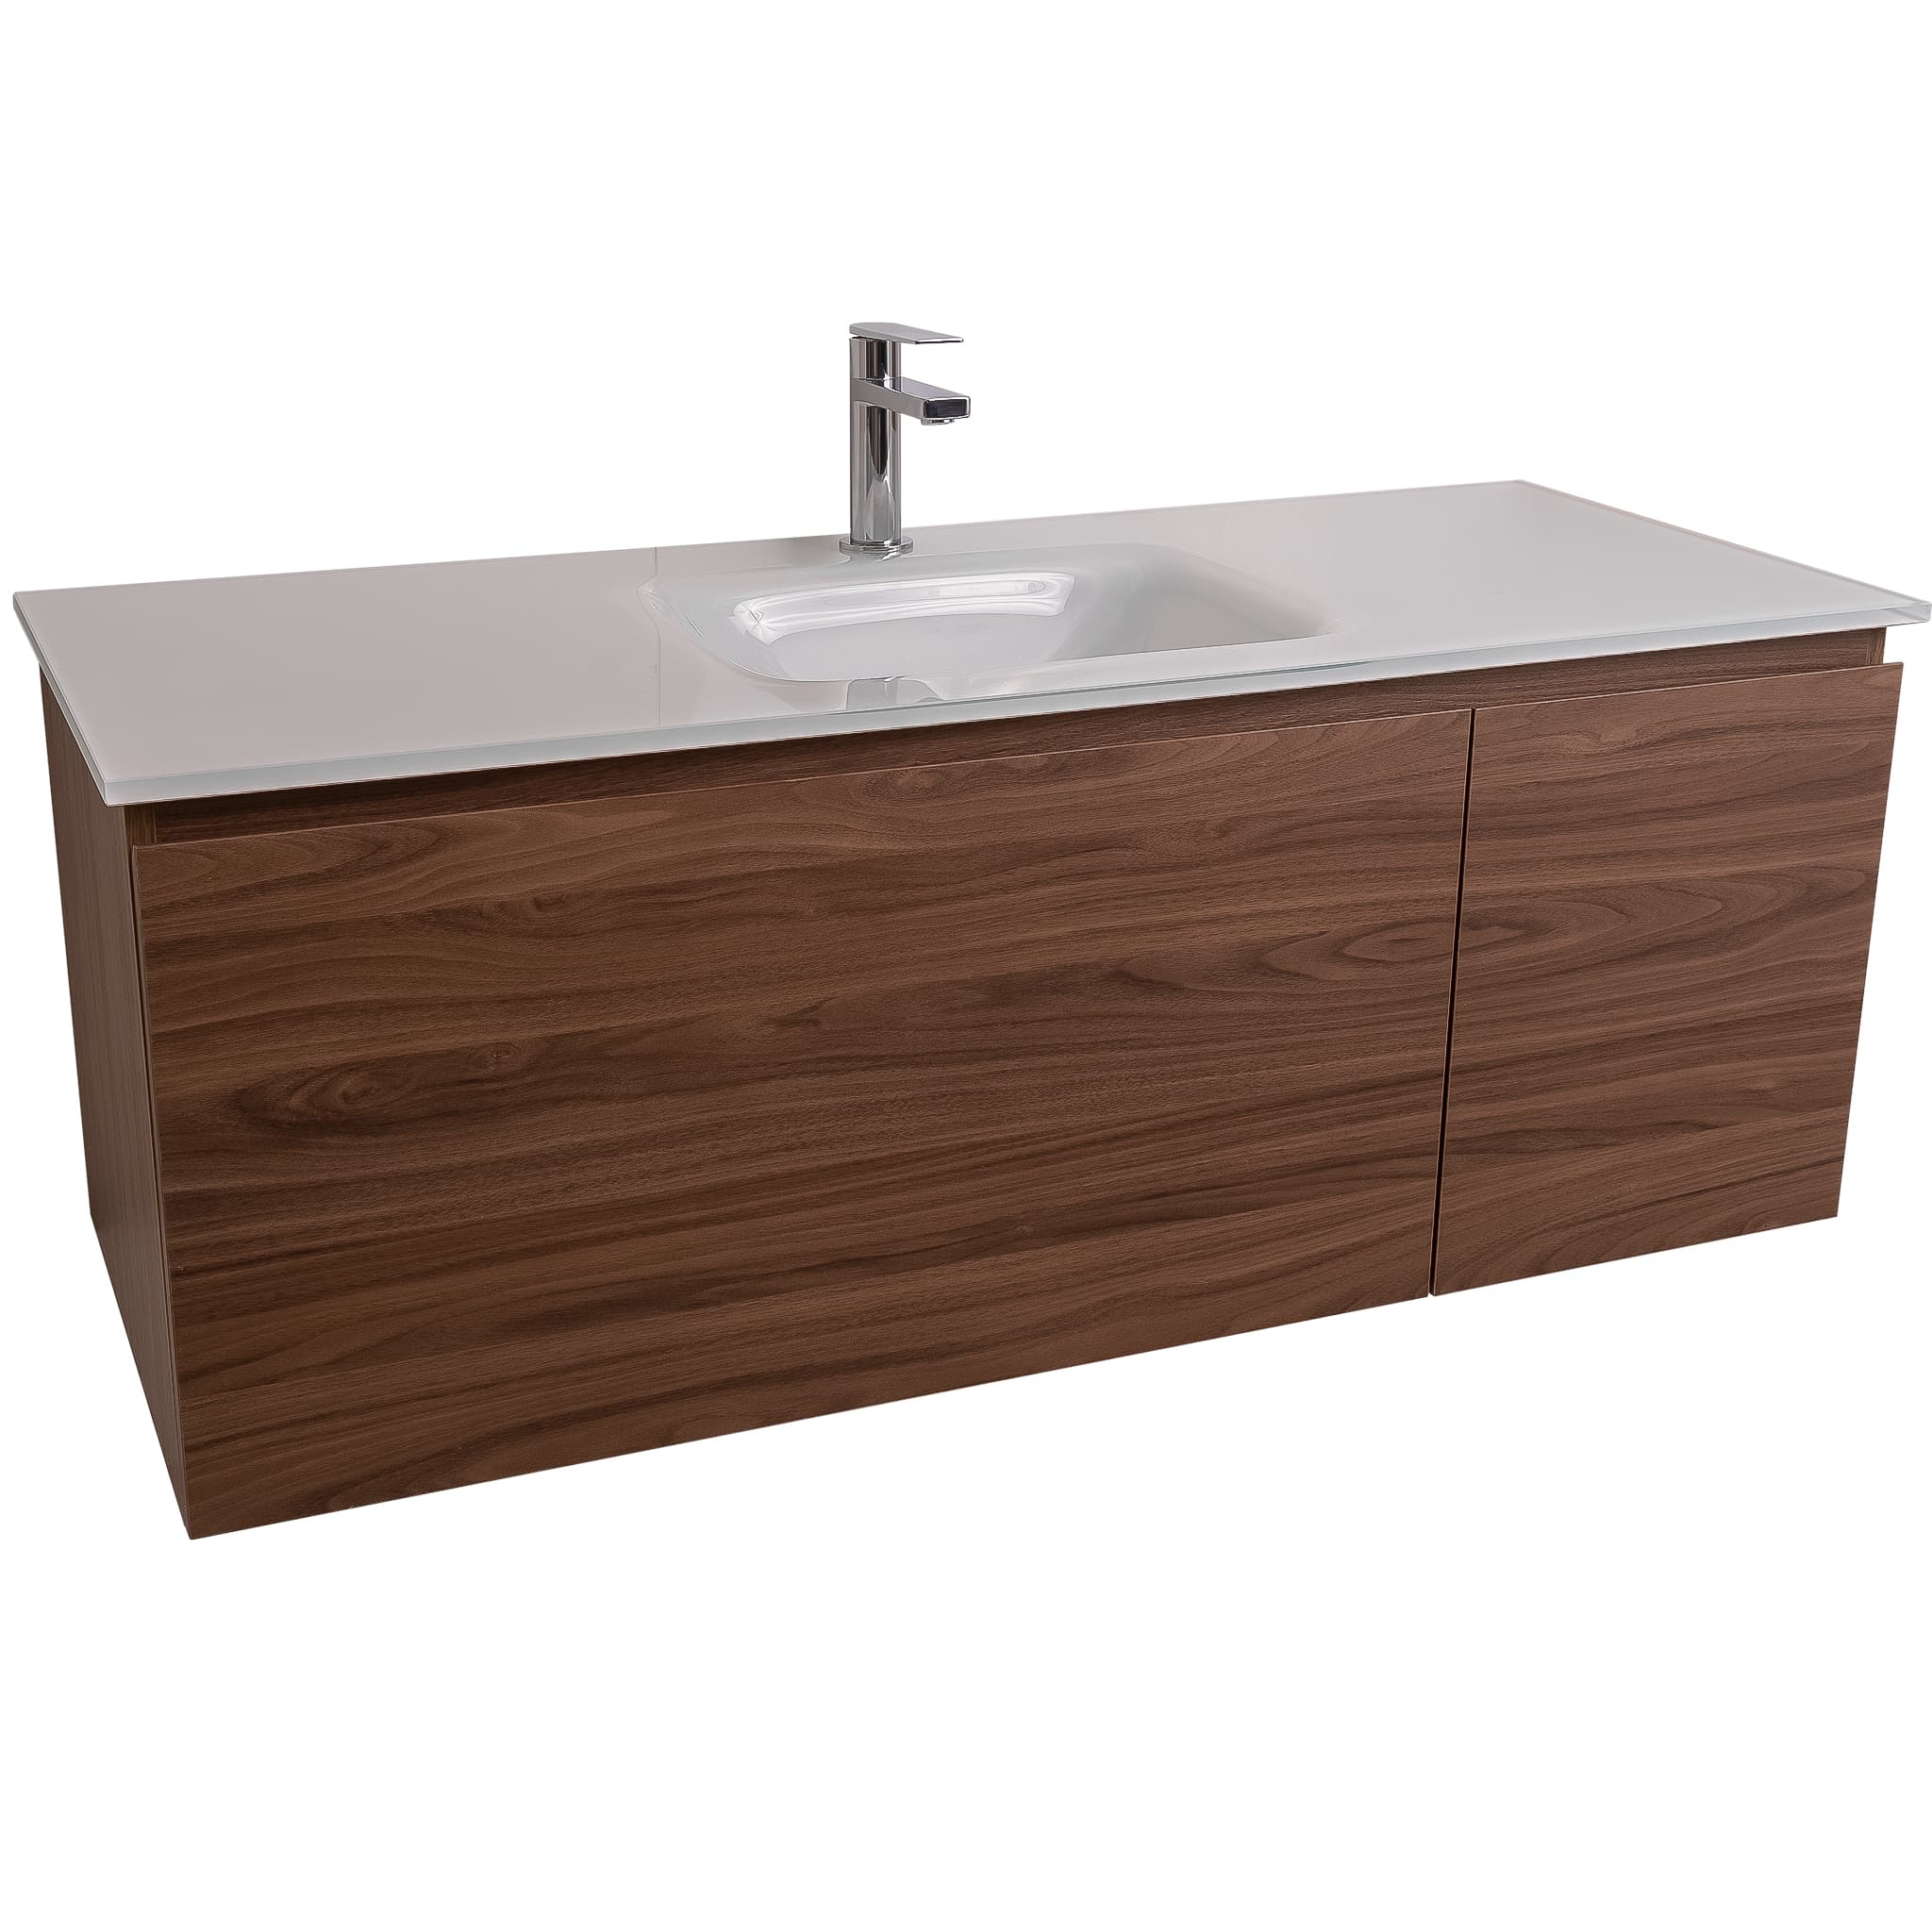 Venice 47.5 Walnut Wood Texture Cabinet, White Tempered Glass Sink, Wall Mounted Modern Vanity Set